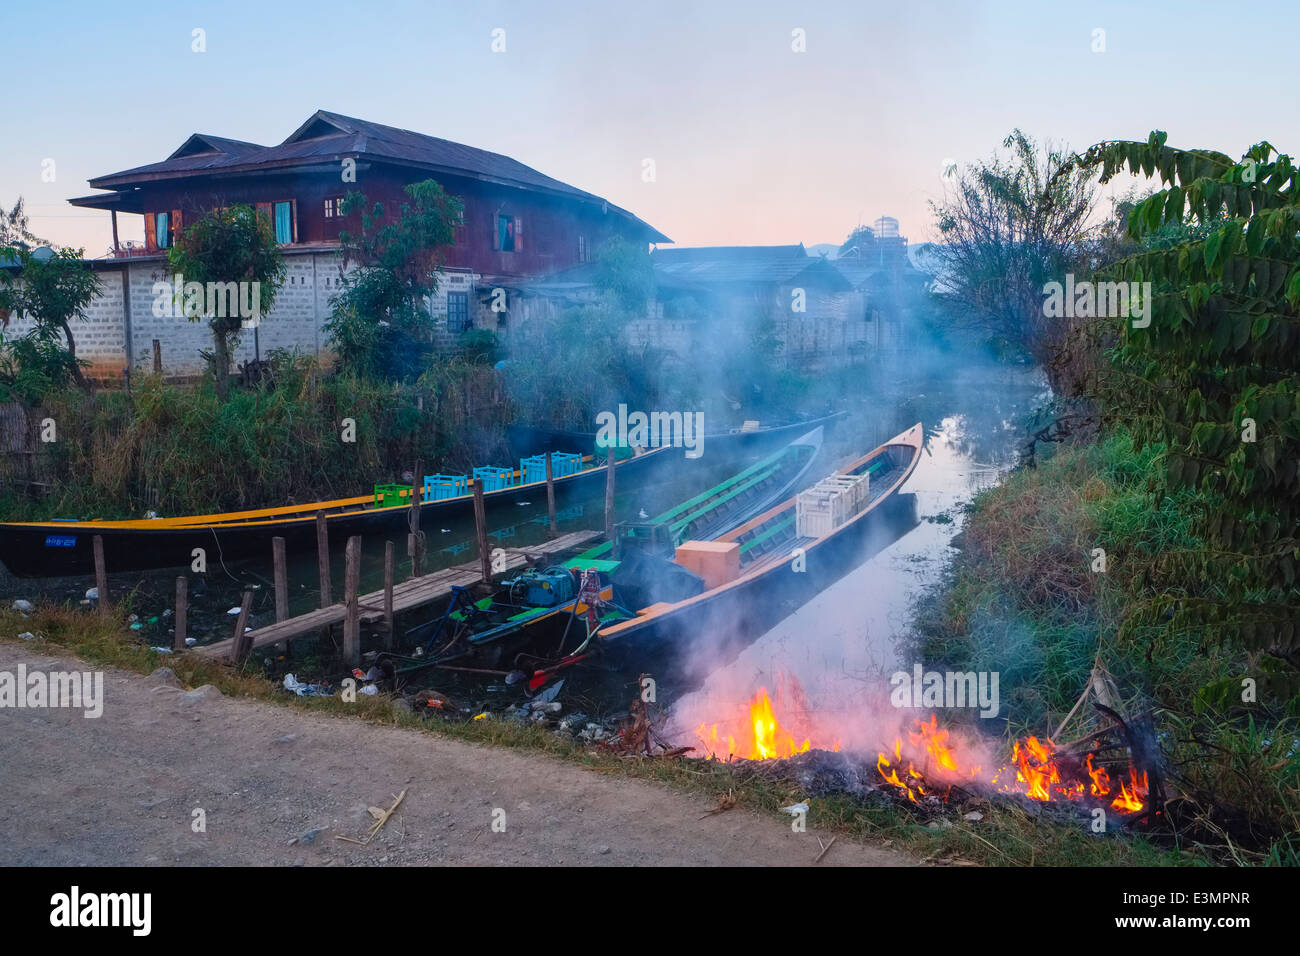 At the canal, Nyaung Shwe, Myanmar, Asia Stock Photo